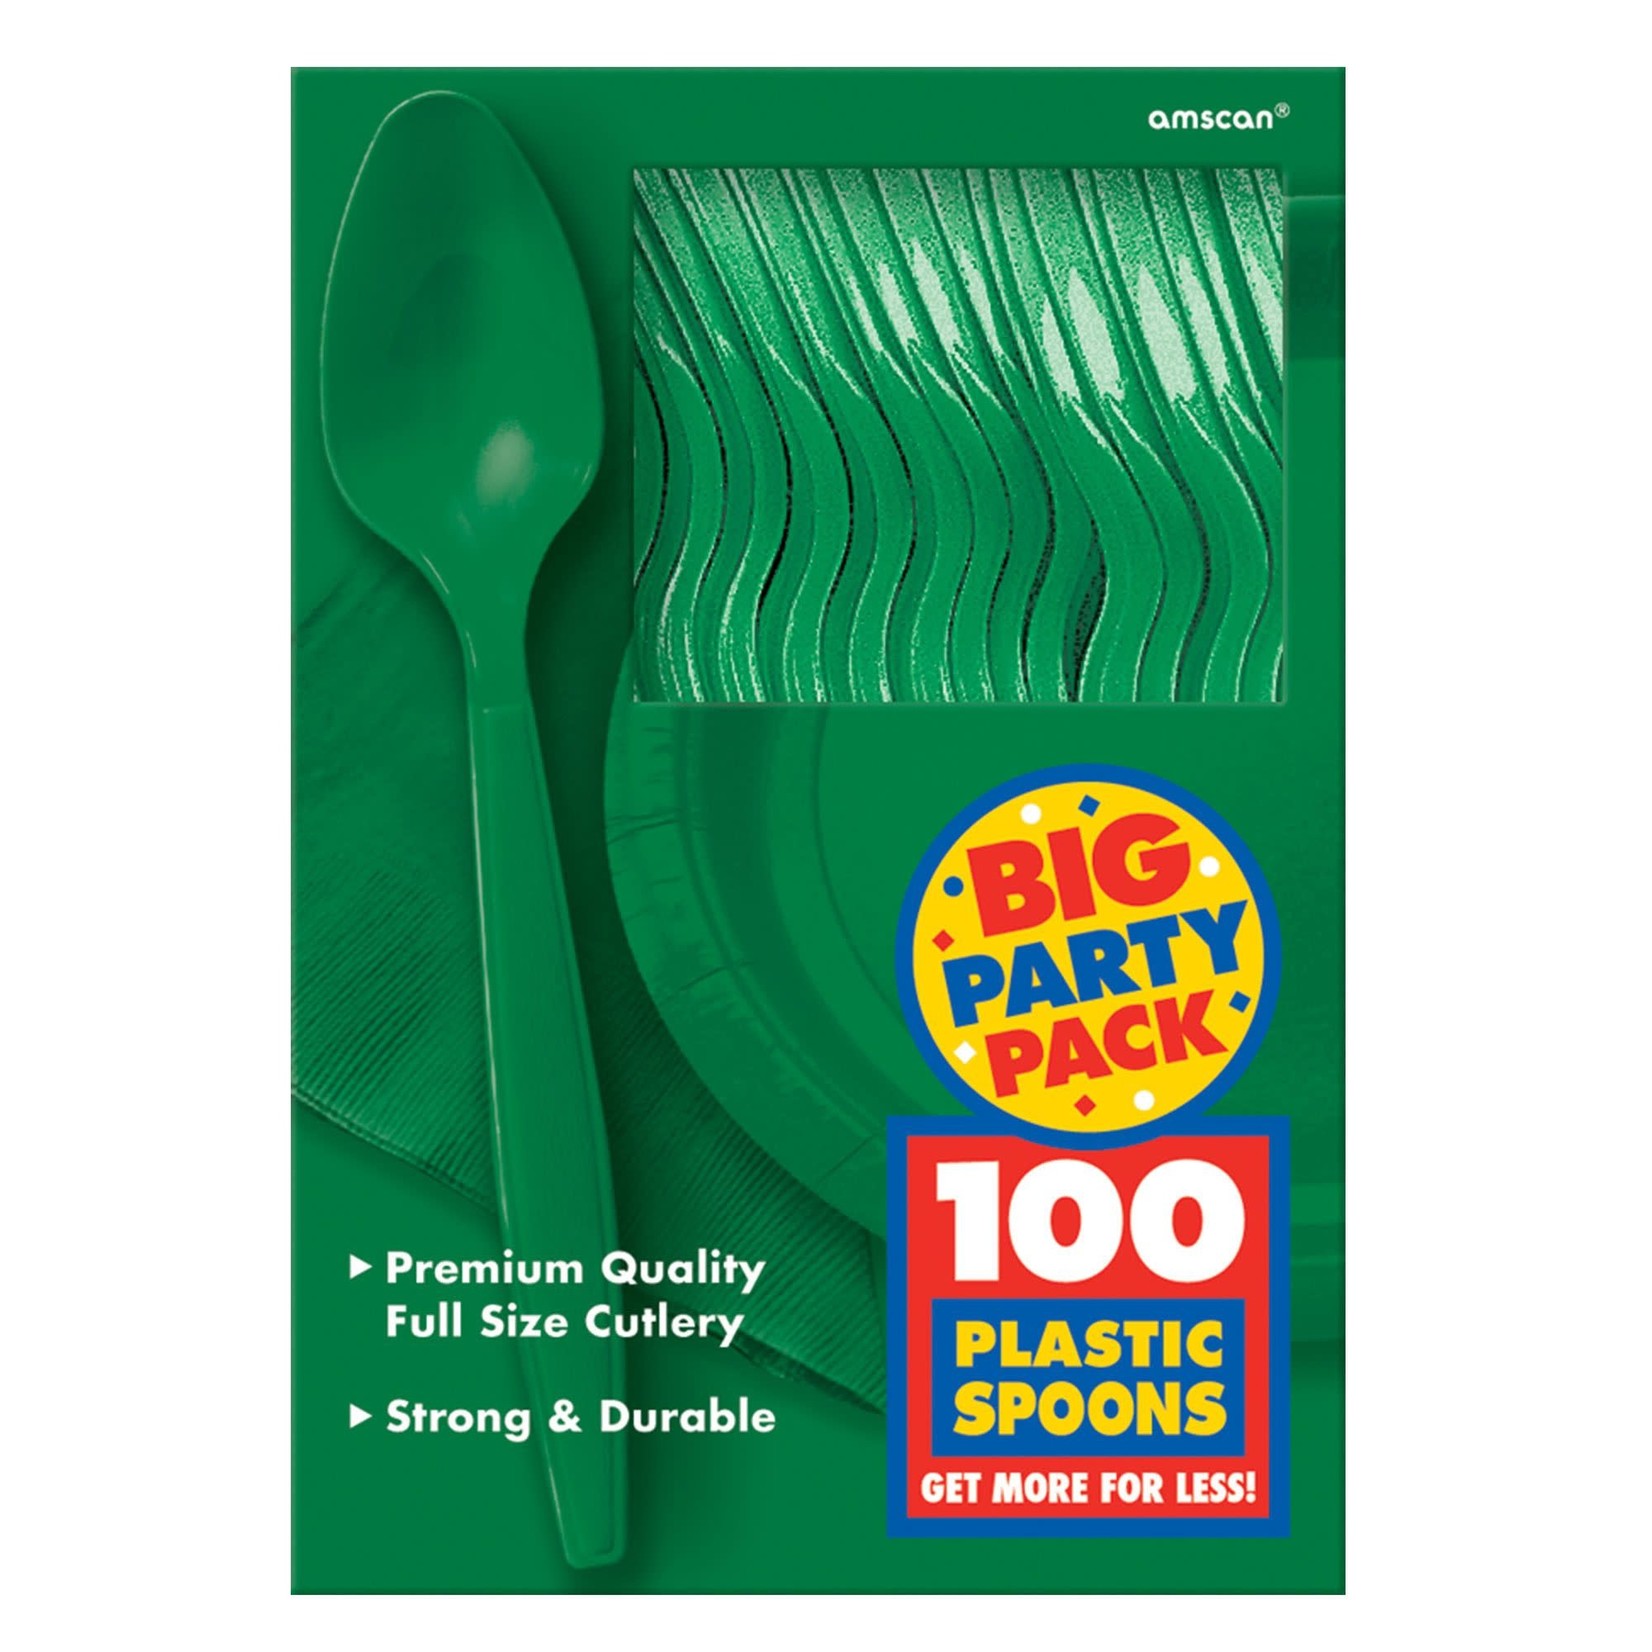 Big Party Pack Plastic Spoons - Festive Green